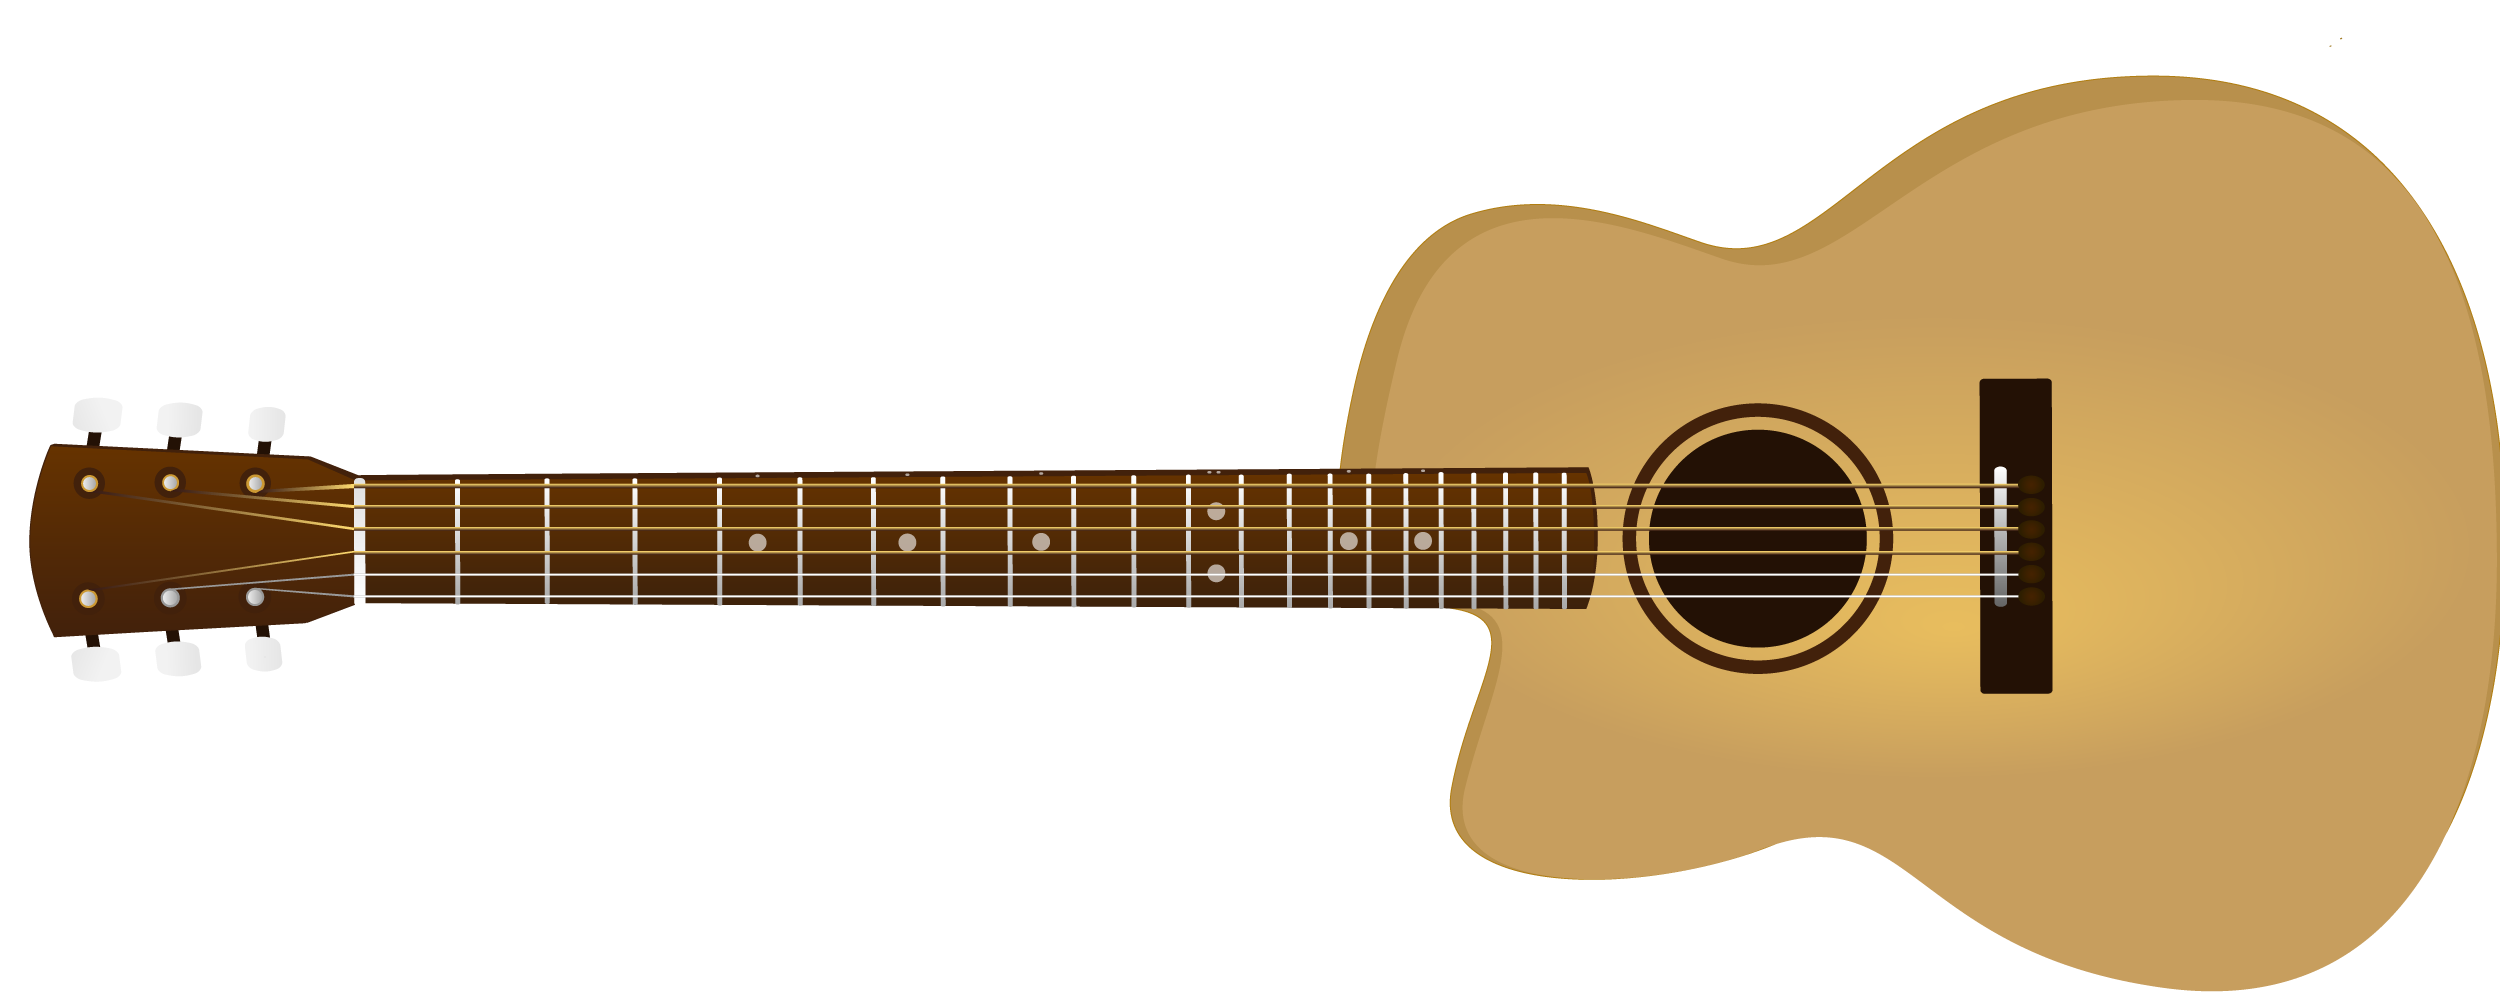 Acoustic-Electric Guitar PNG HD Quality